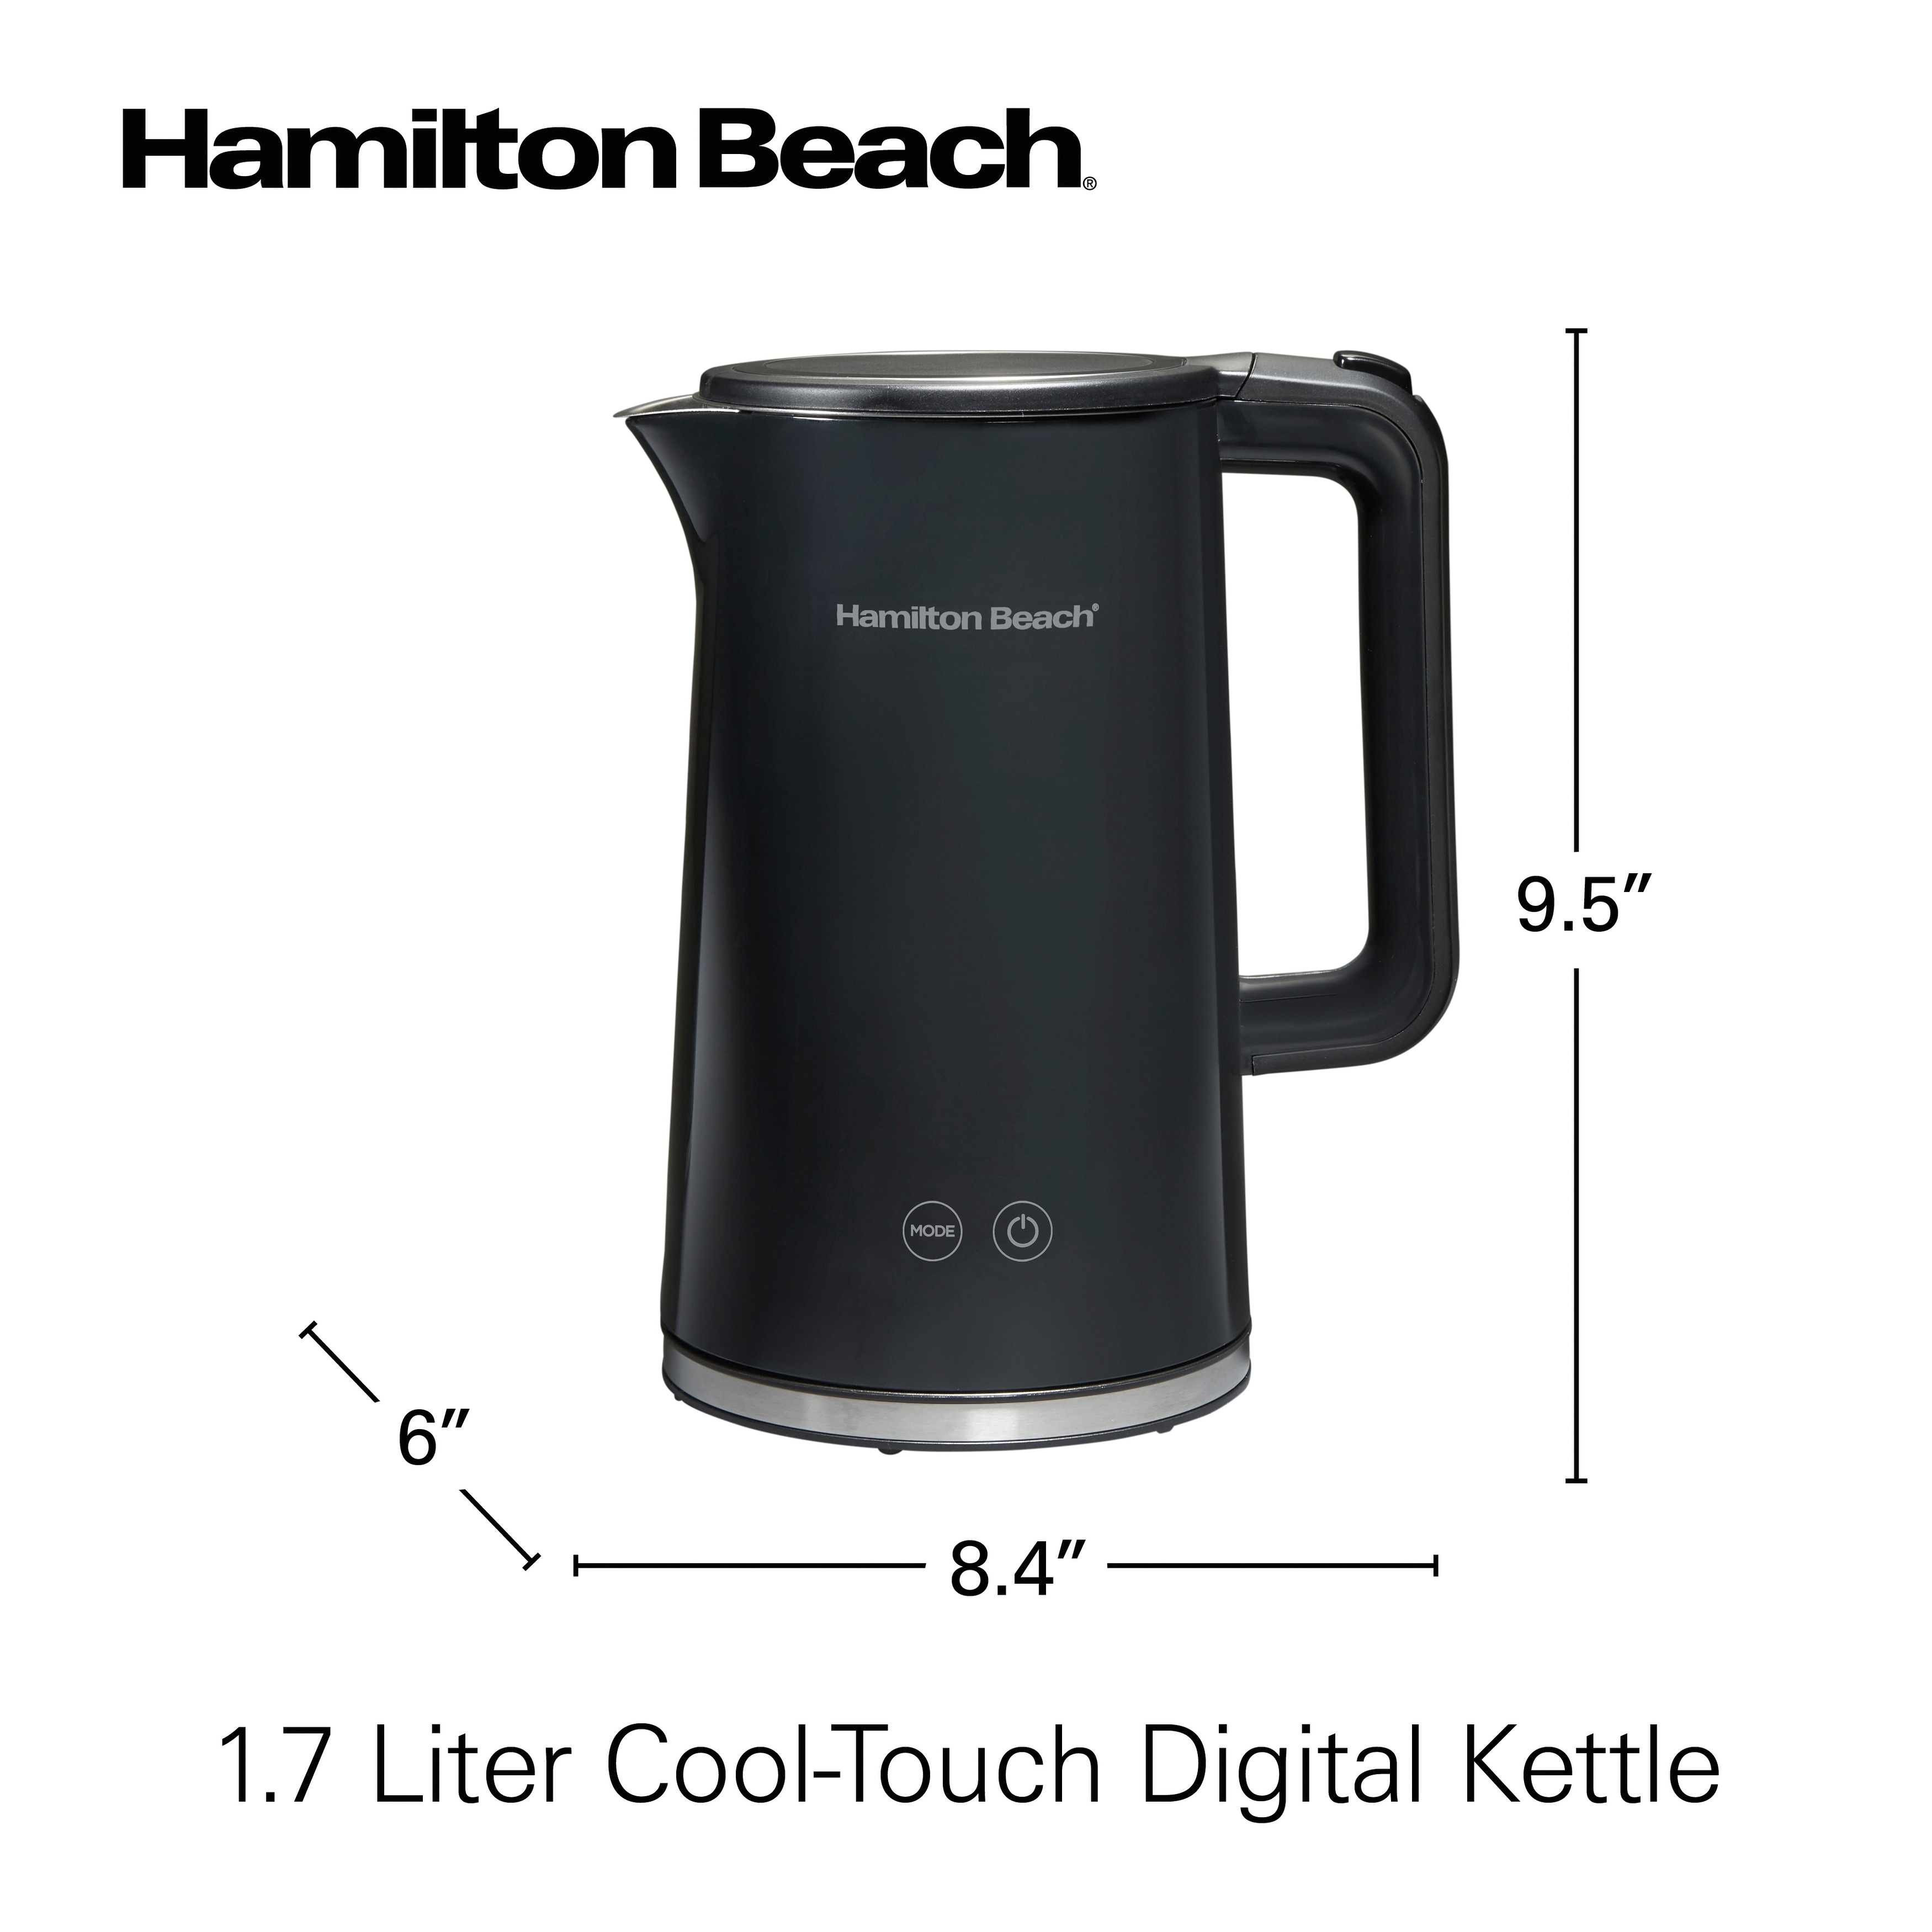 https://ak1.ostkcdn.com/images/products/is/images/direct/43d2fcd4acb89ae1d64349b986c4abe99a253207/1.7-Liter-Cool-Touch-Digital-Kettle.jpg